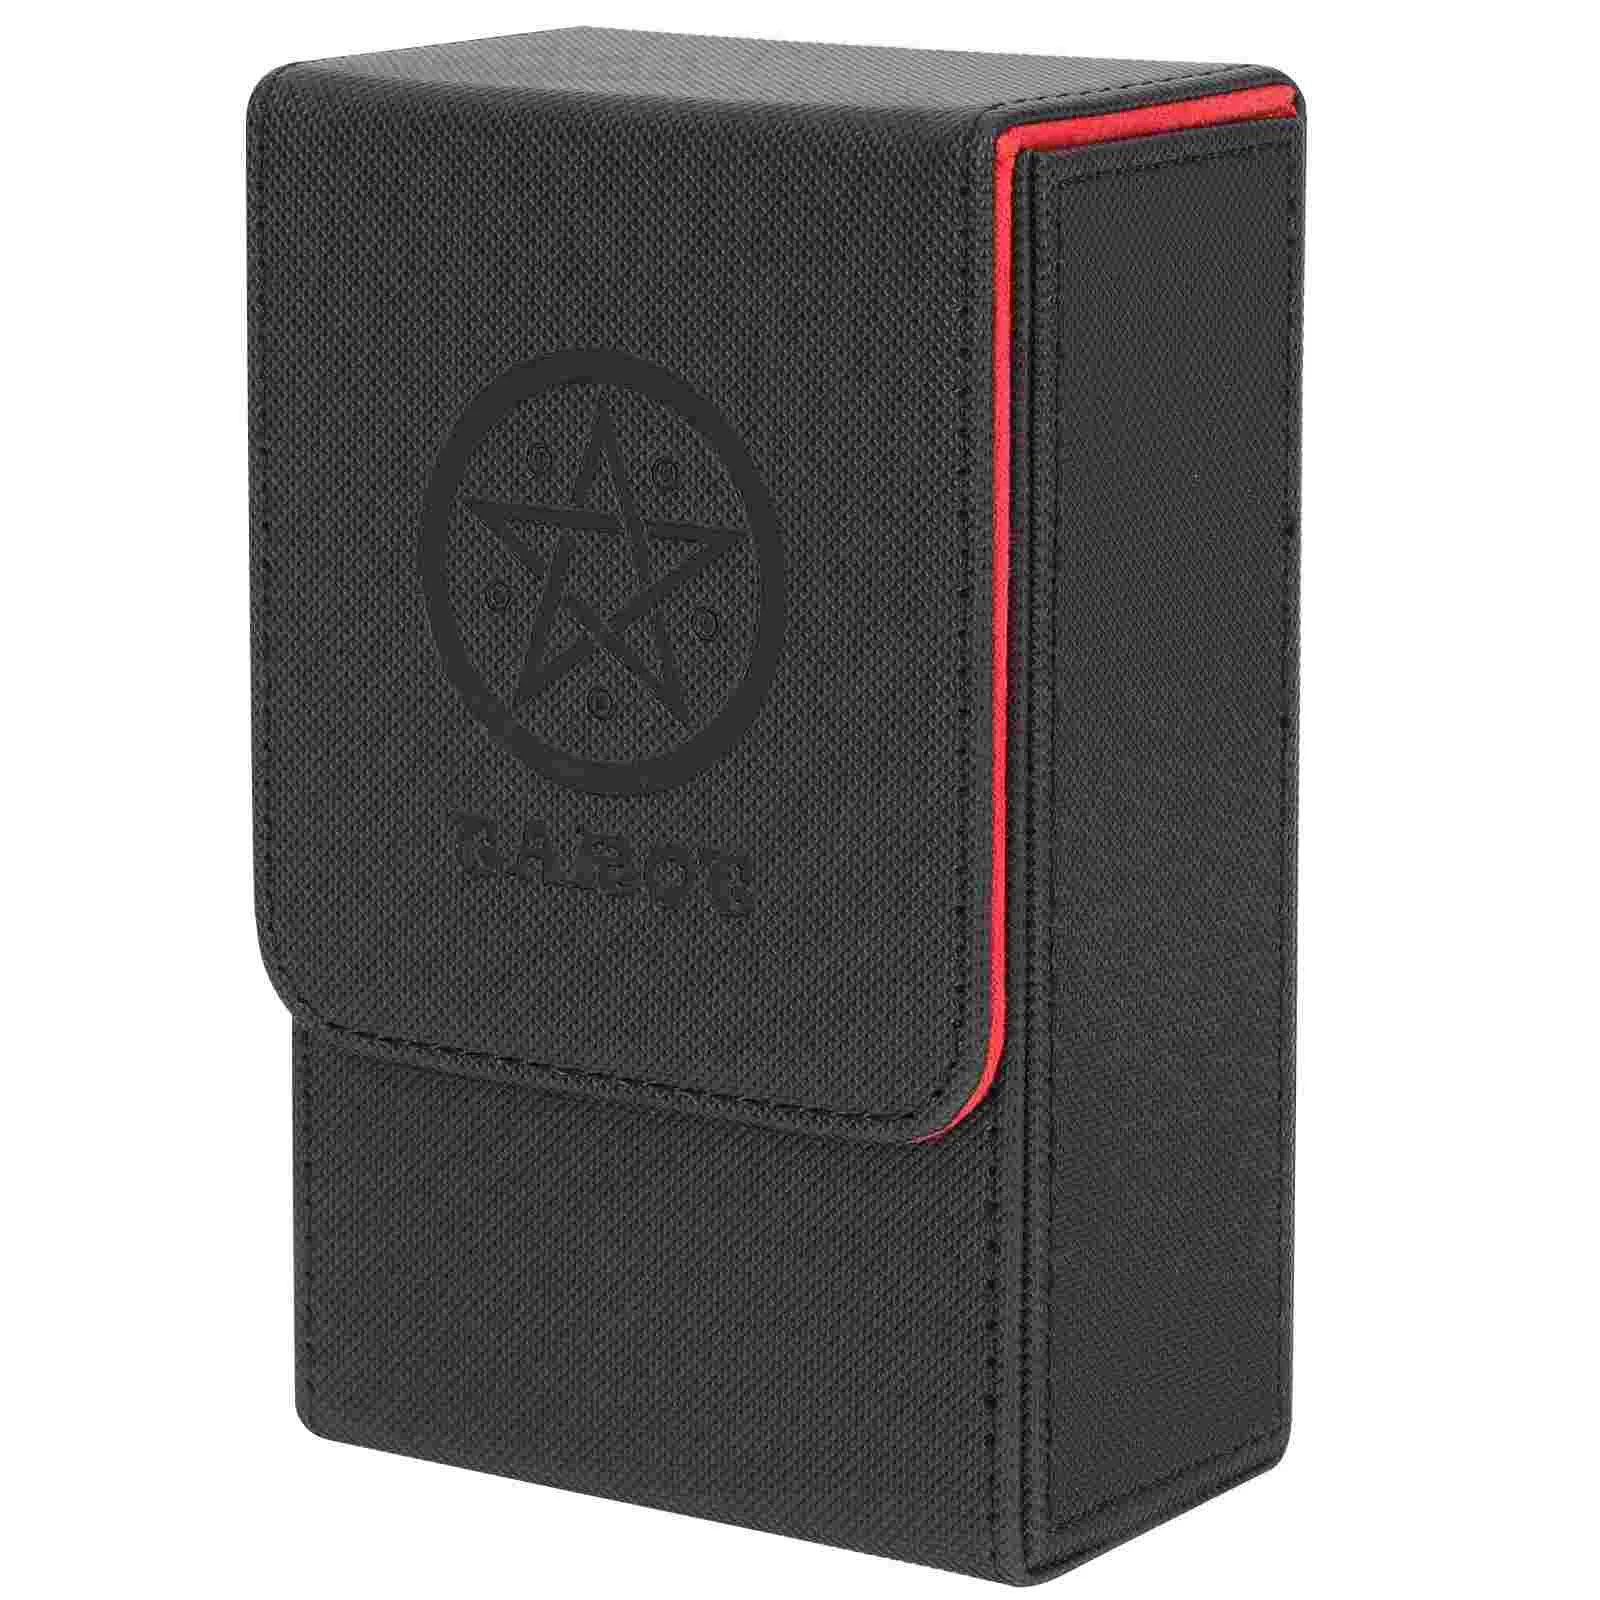 

Tarot Card Box Wiccan Supplies Storage Container Cards Holder Portable Deck Rectangular Canister PU Case Desk